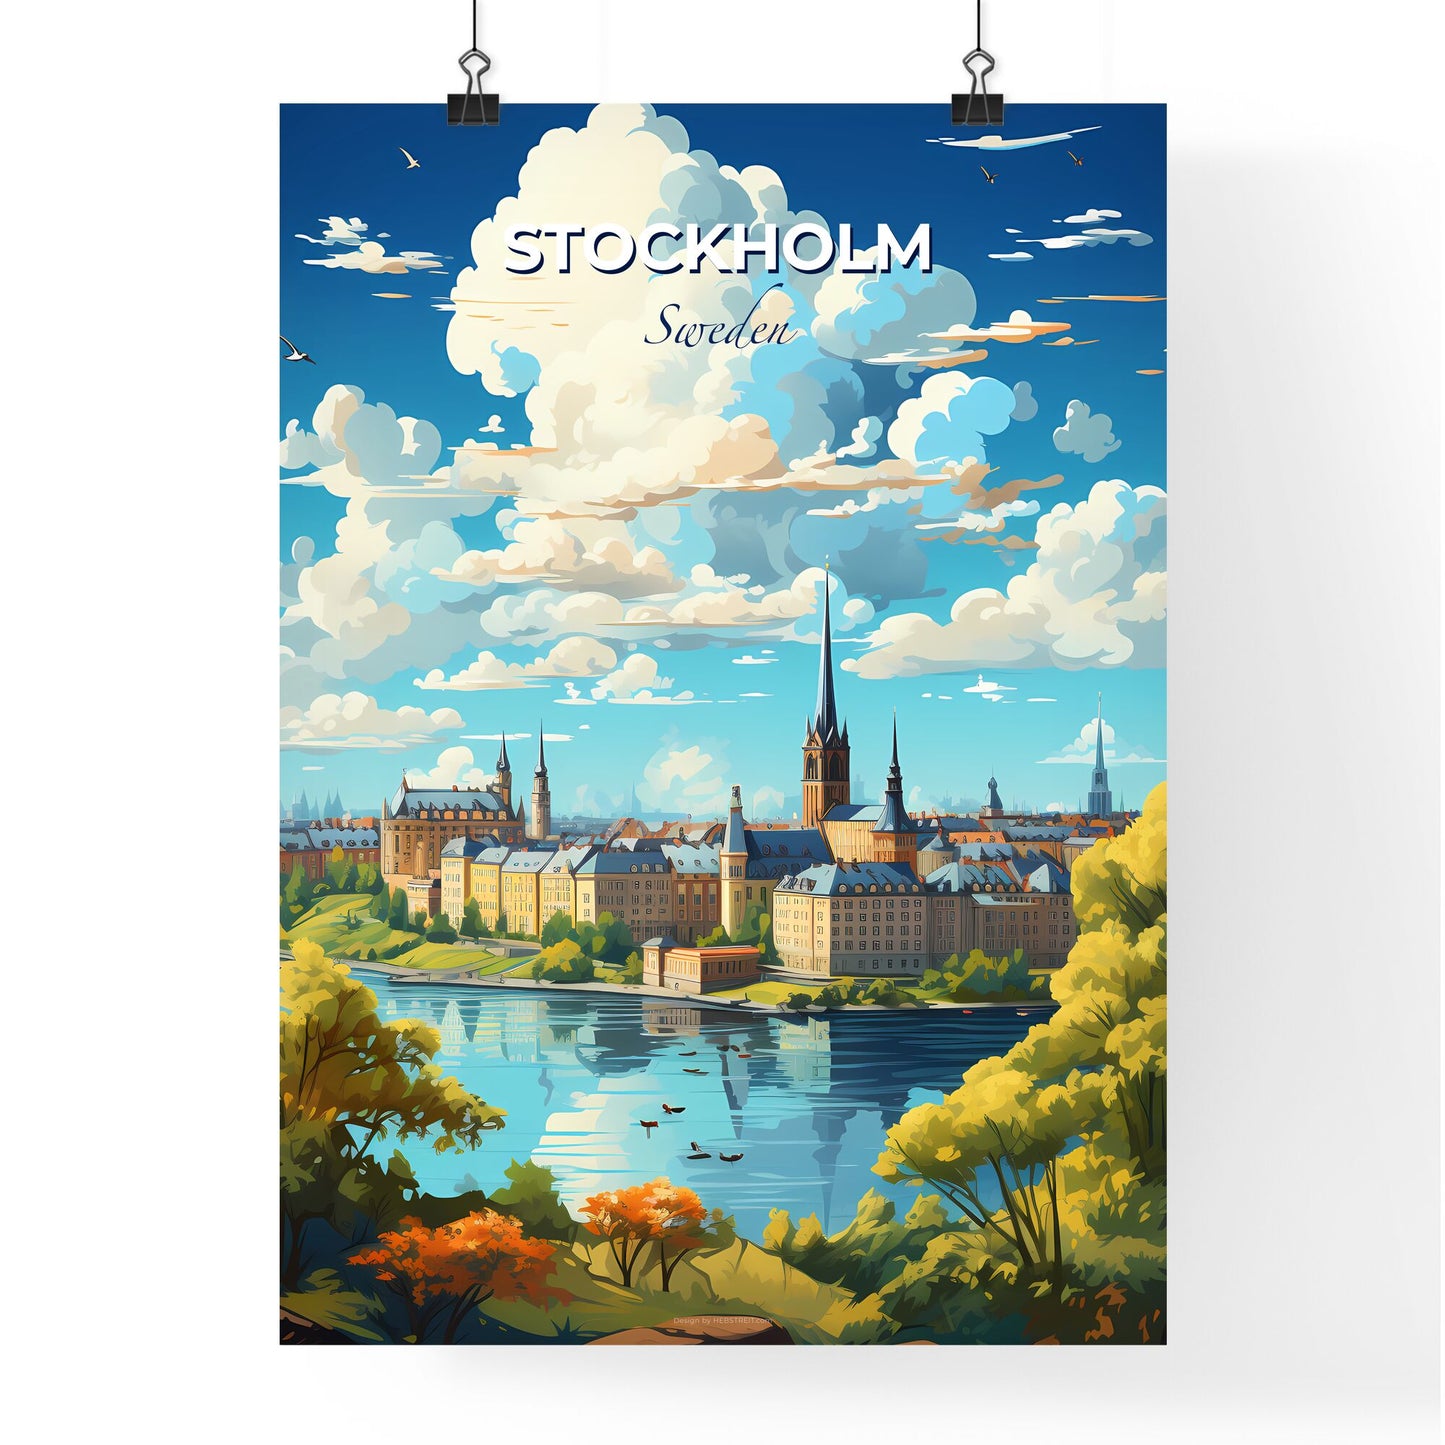 Stockholm Sweden Skyline - A City By A River - Customizable Travel Gift Default Title